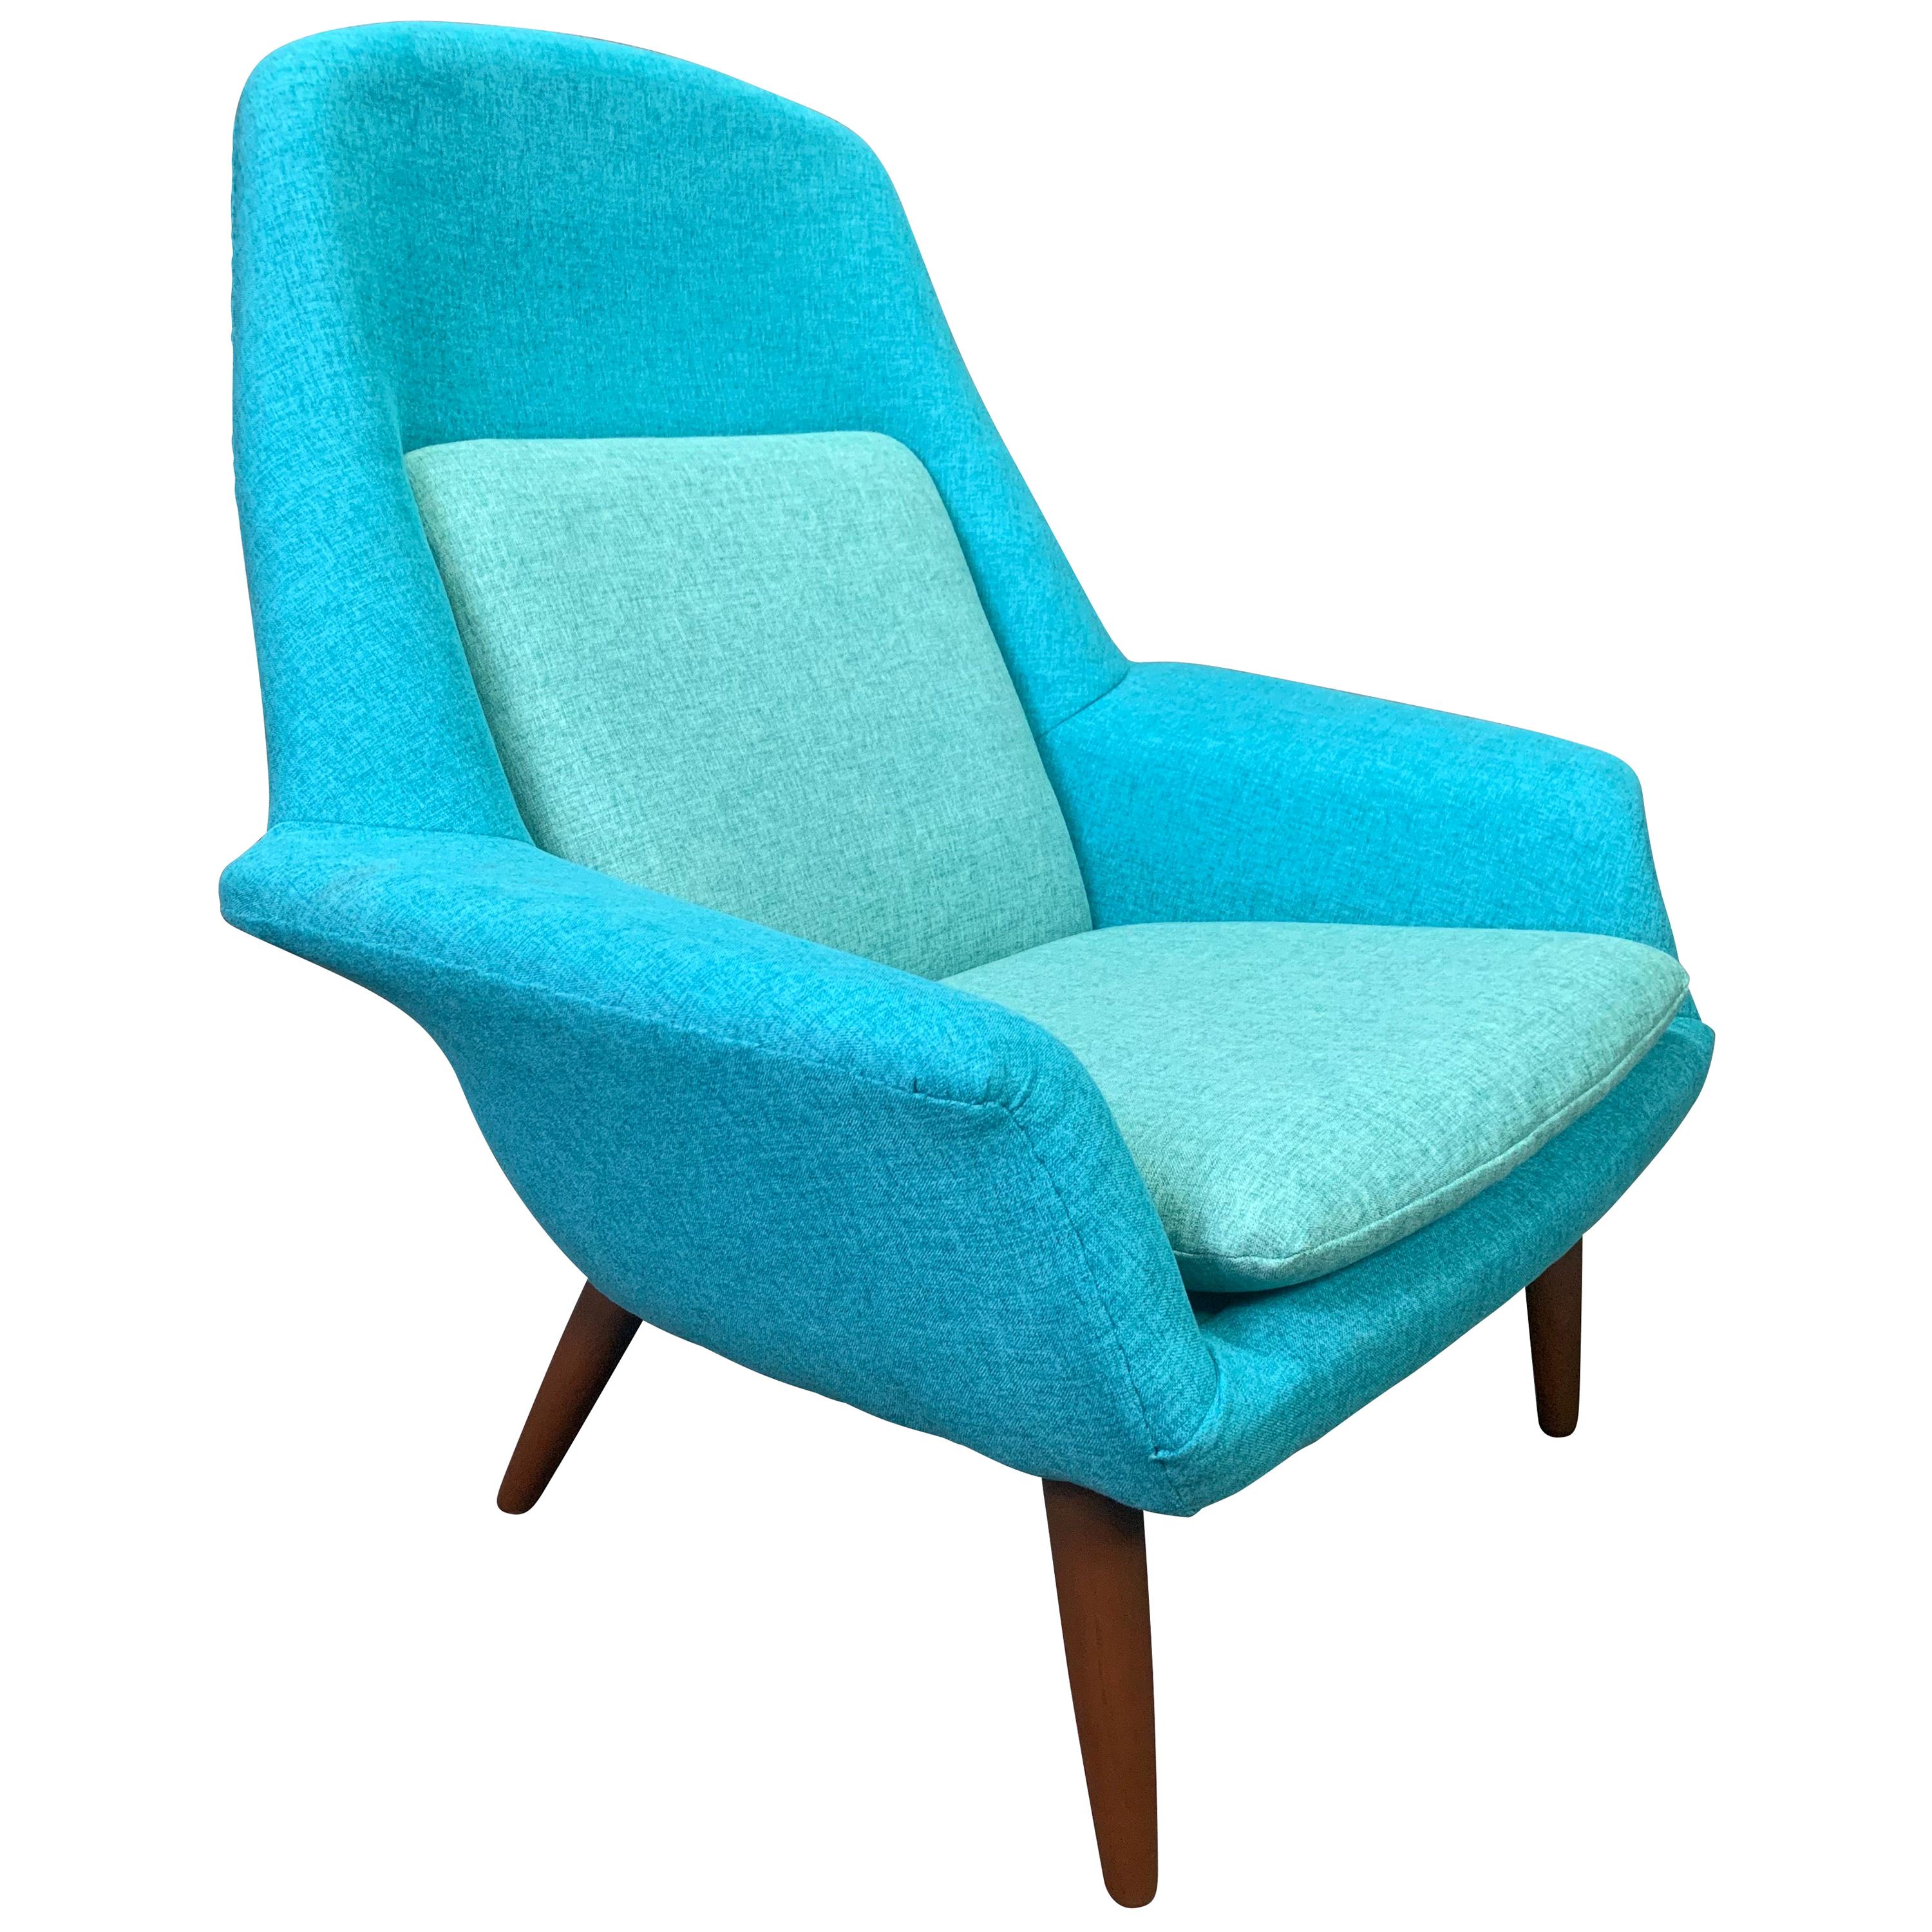 Vintage Scandinavian Mid-Century Modern Lounge Chair by Broderna Anderssons For Sale